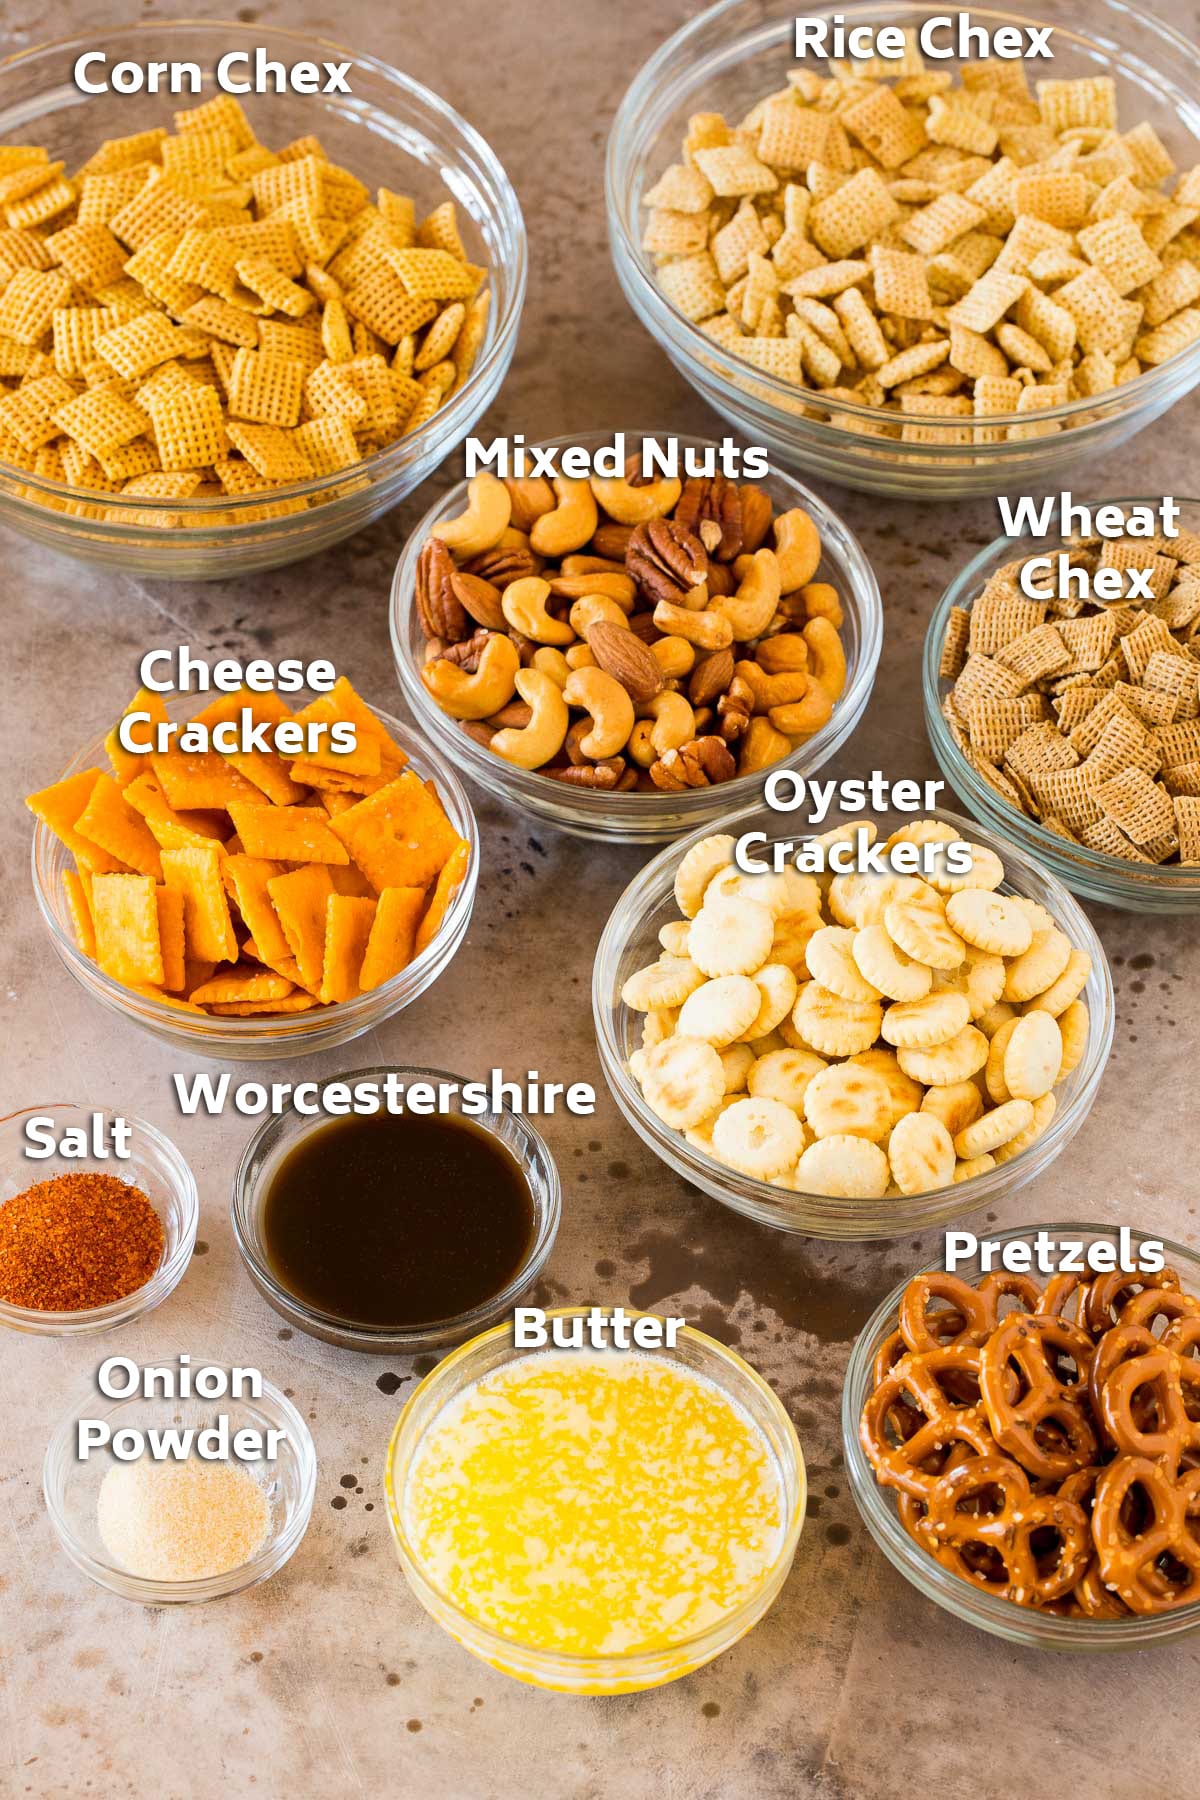 Bowls of ingredients including cereal, crackers, pretzels, nuts, butter and seasonings.